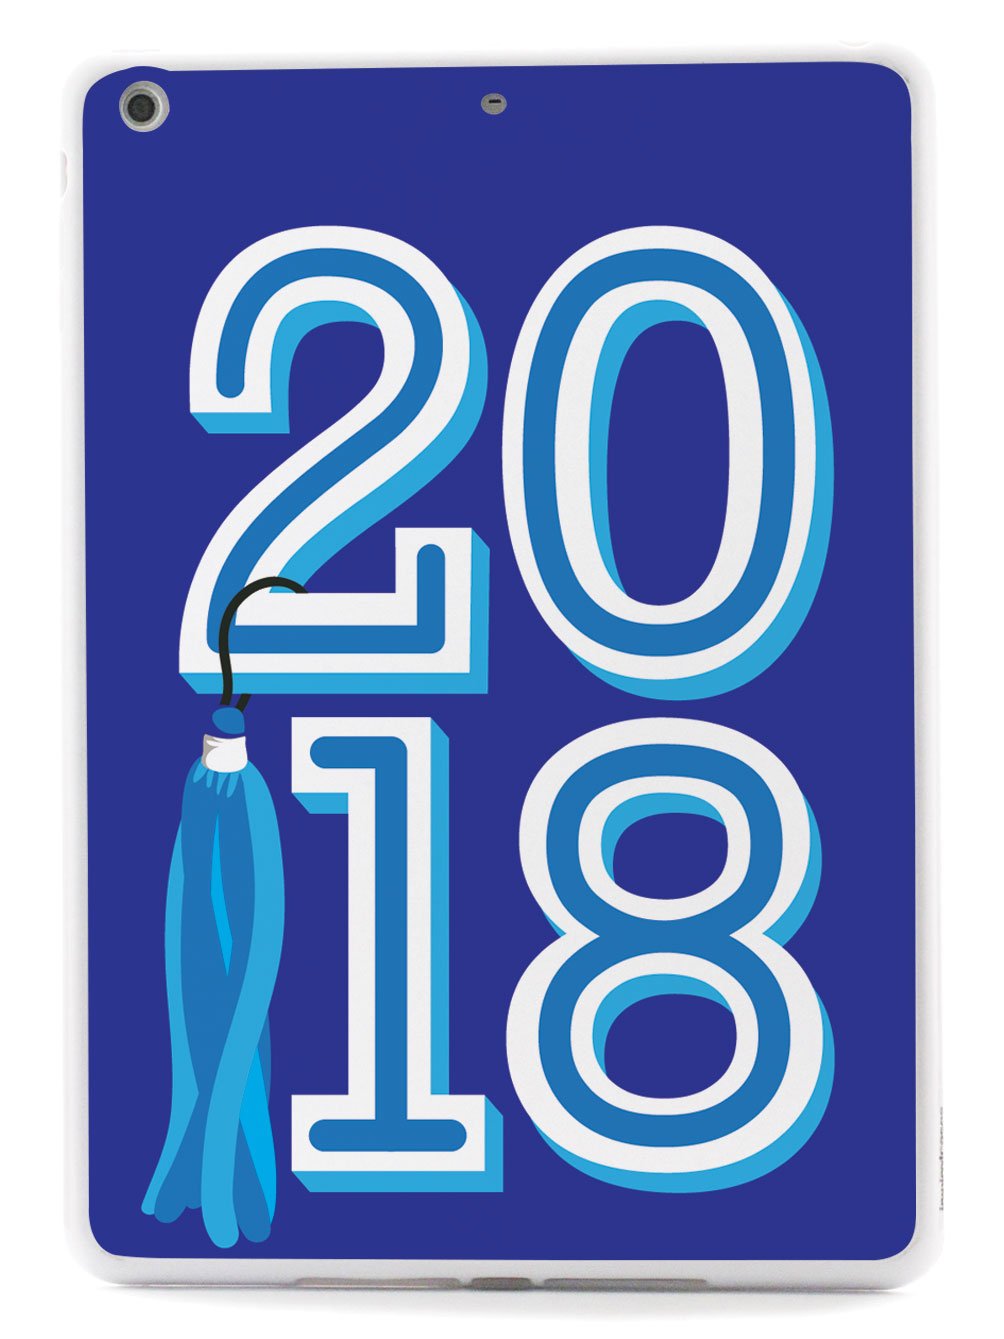 Class of 2018 - Blue - White Case